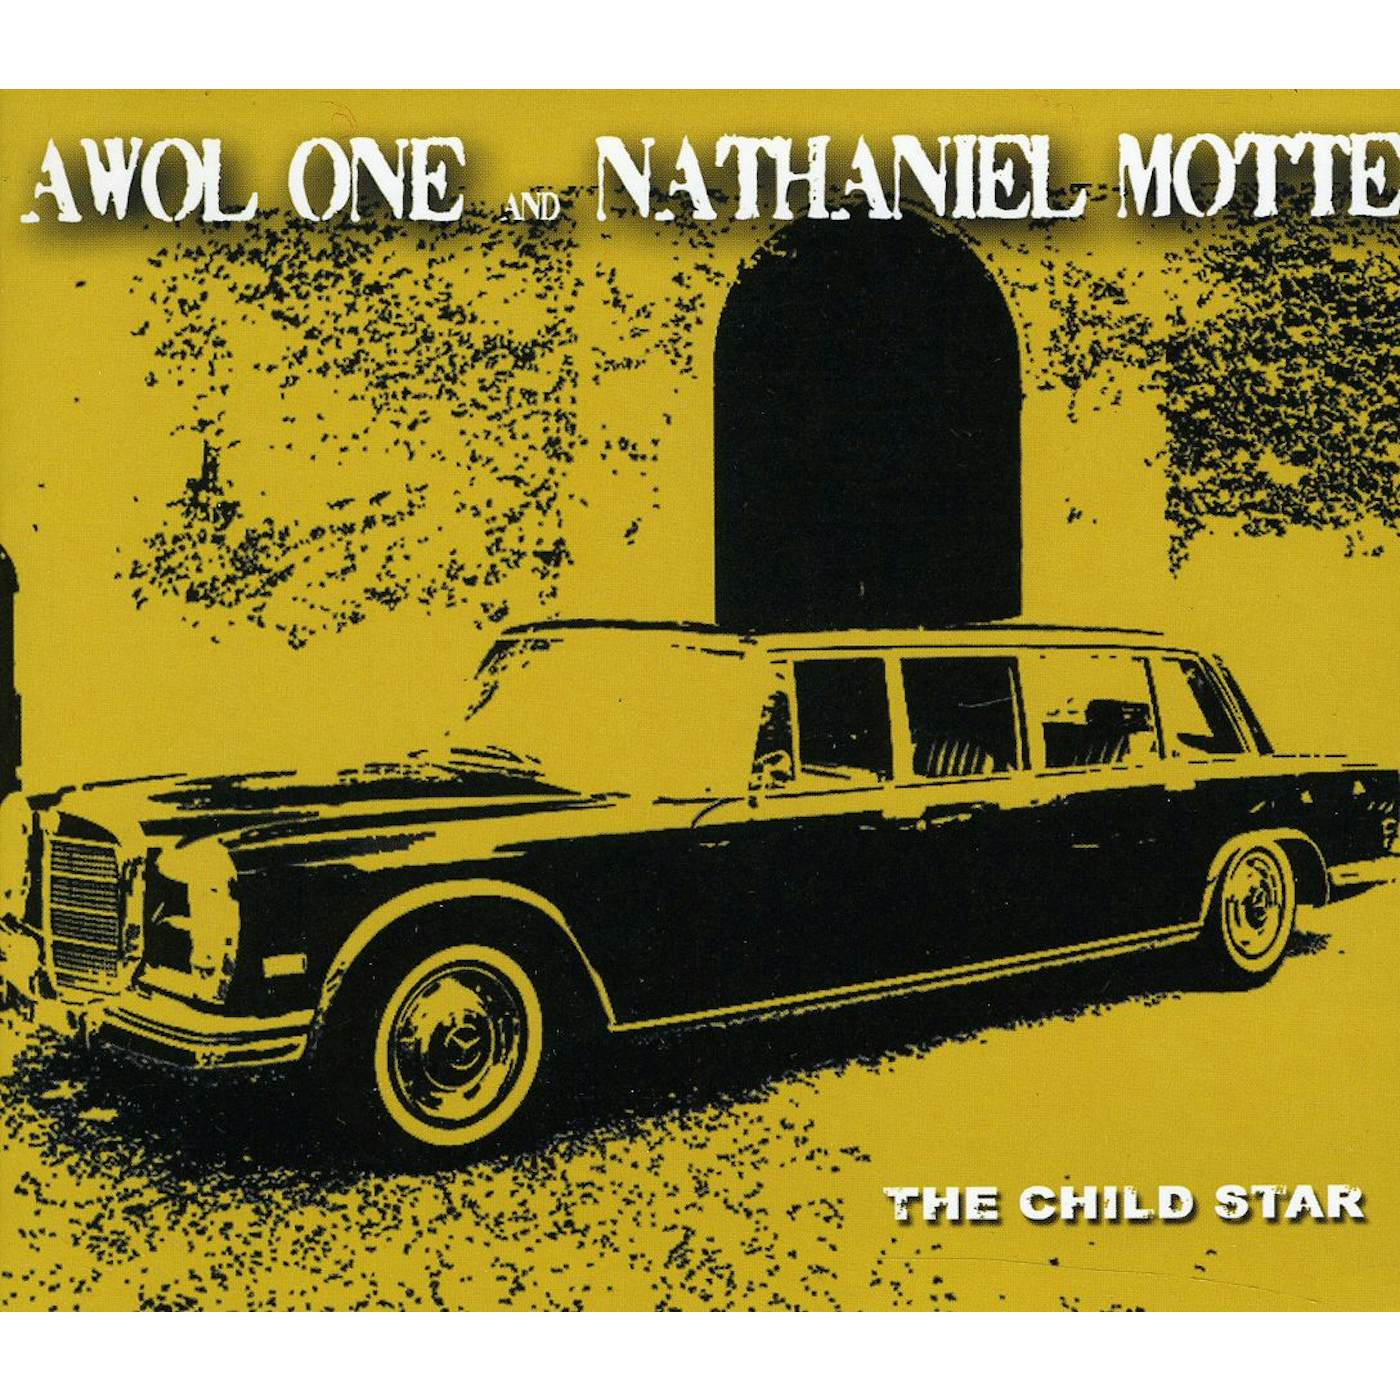 Awol One and Nathaniel Motte CHILD STAR CD